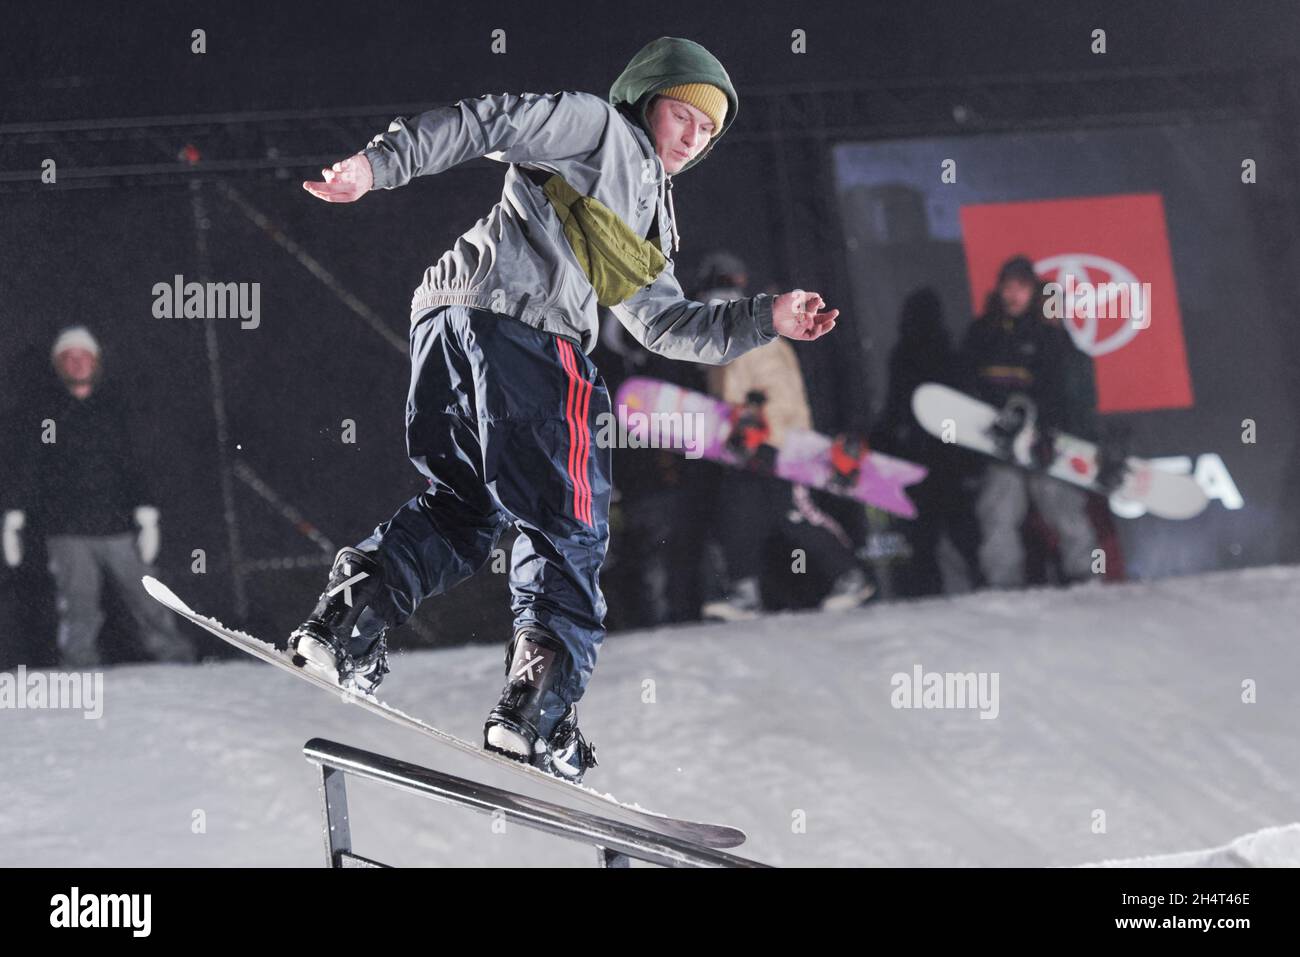 St. Petersburg, Russia, 23rd February, 2019: Snowboarder performs trick during the festival of extreme snowboarding Stairs and Rails Stock Photo